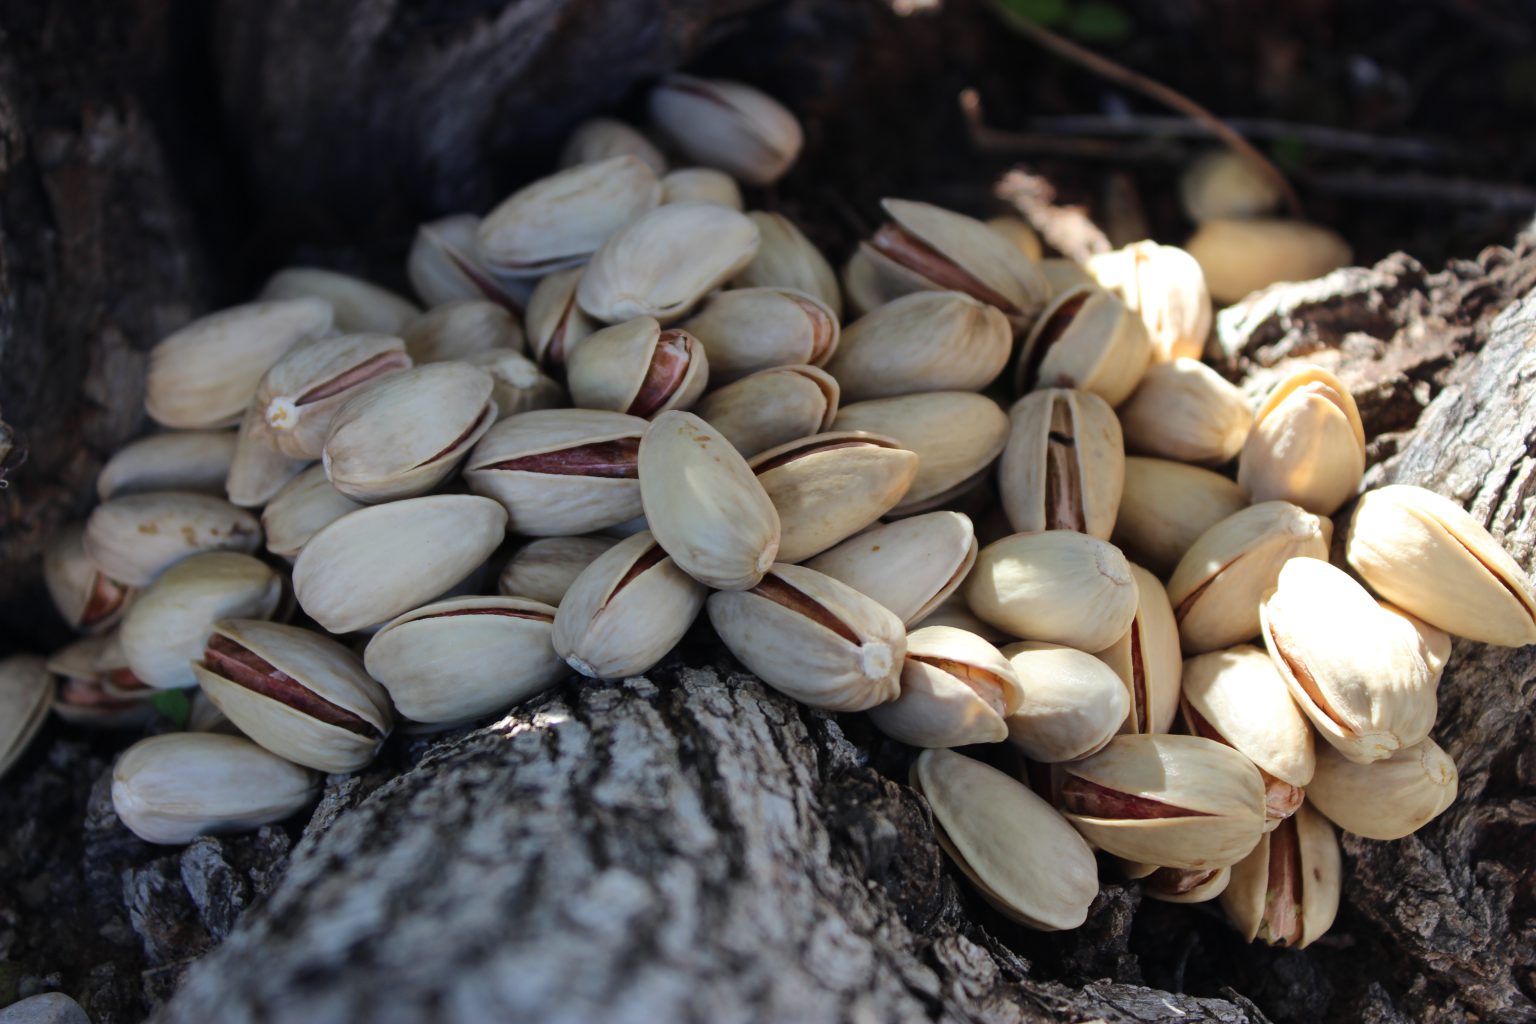 The Largest Supplier of Akbari Pistachios in Iran